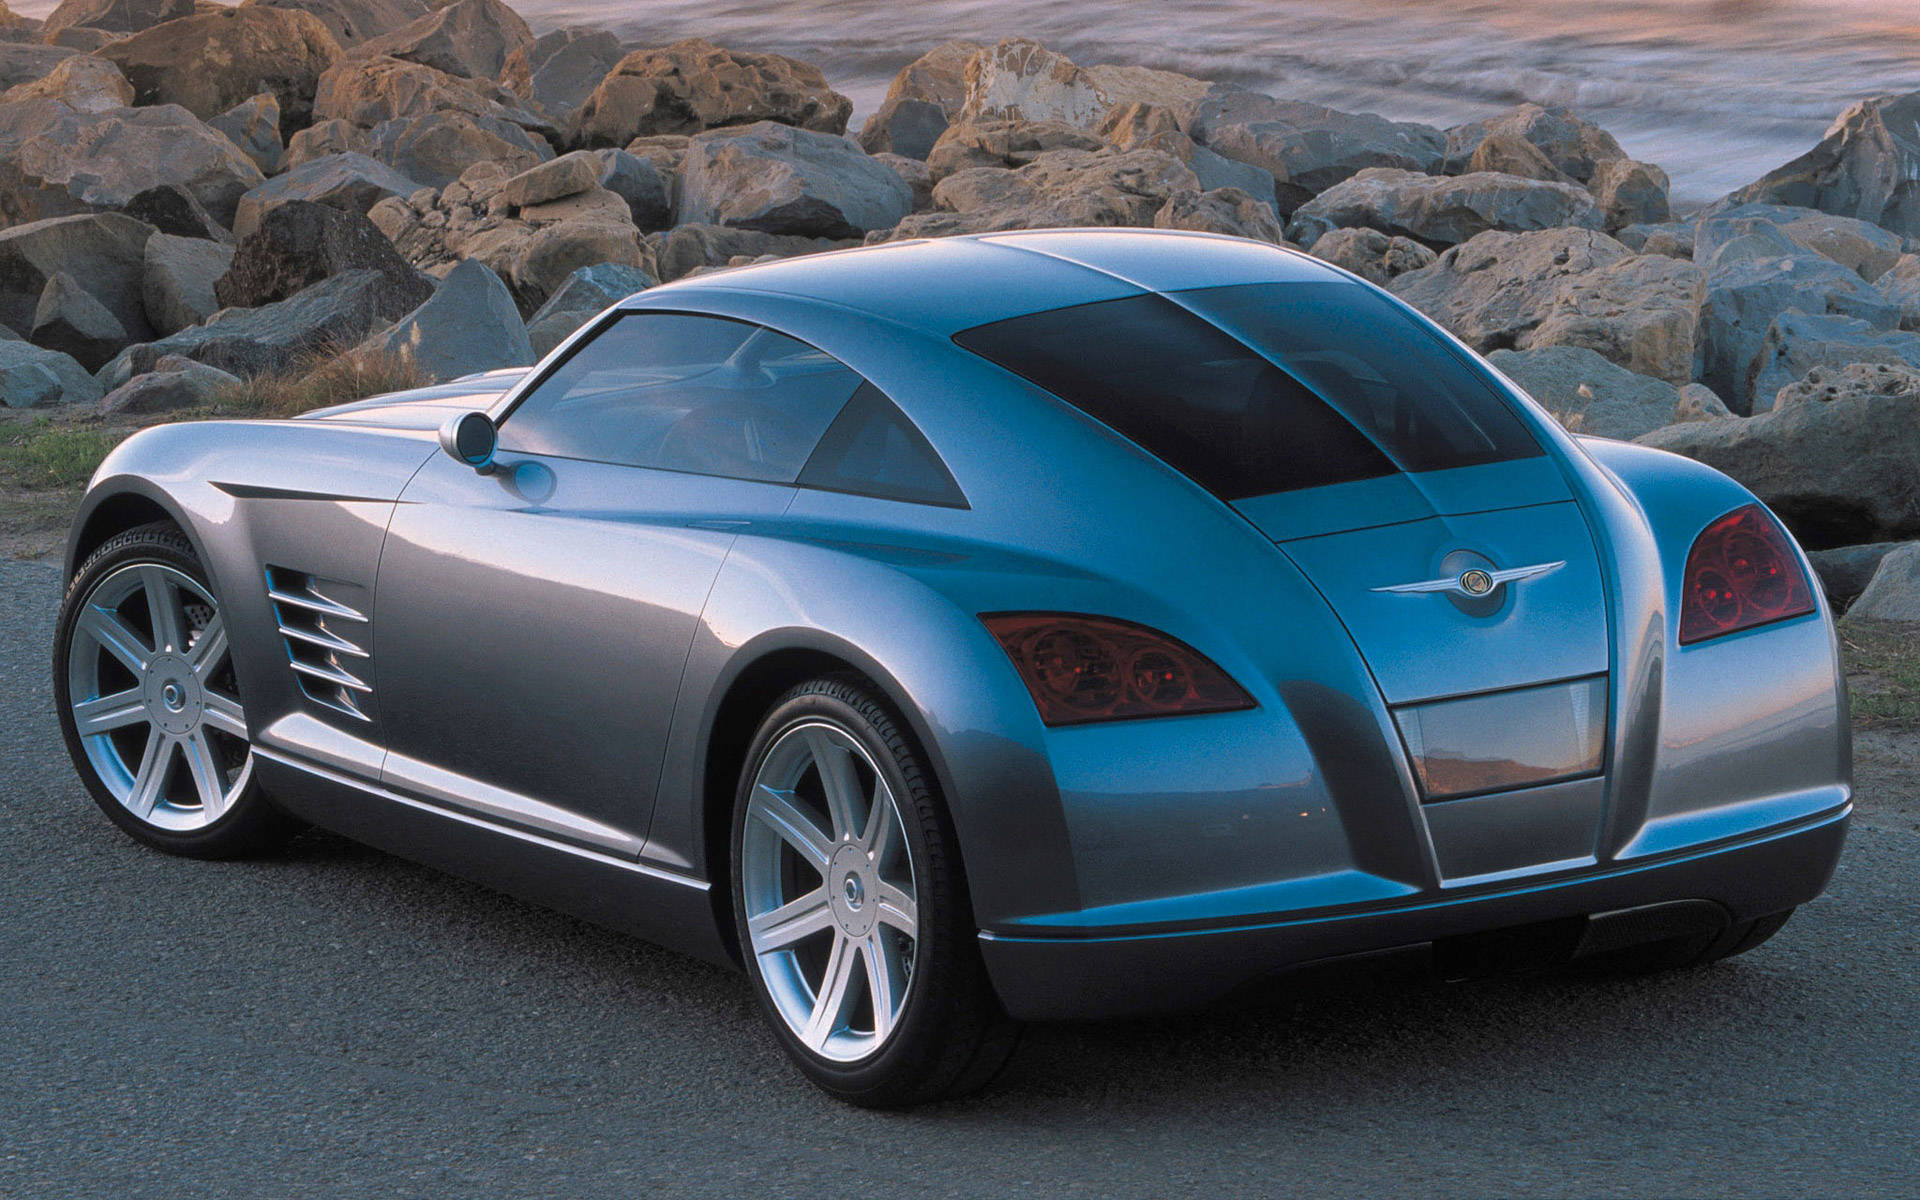 Elegance In Movement - The 2004 Chrysler Crossfire Background